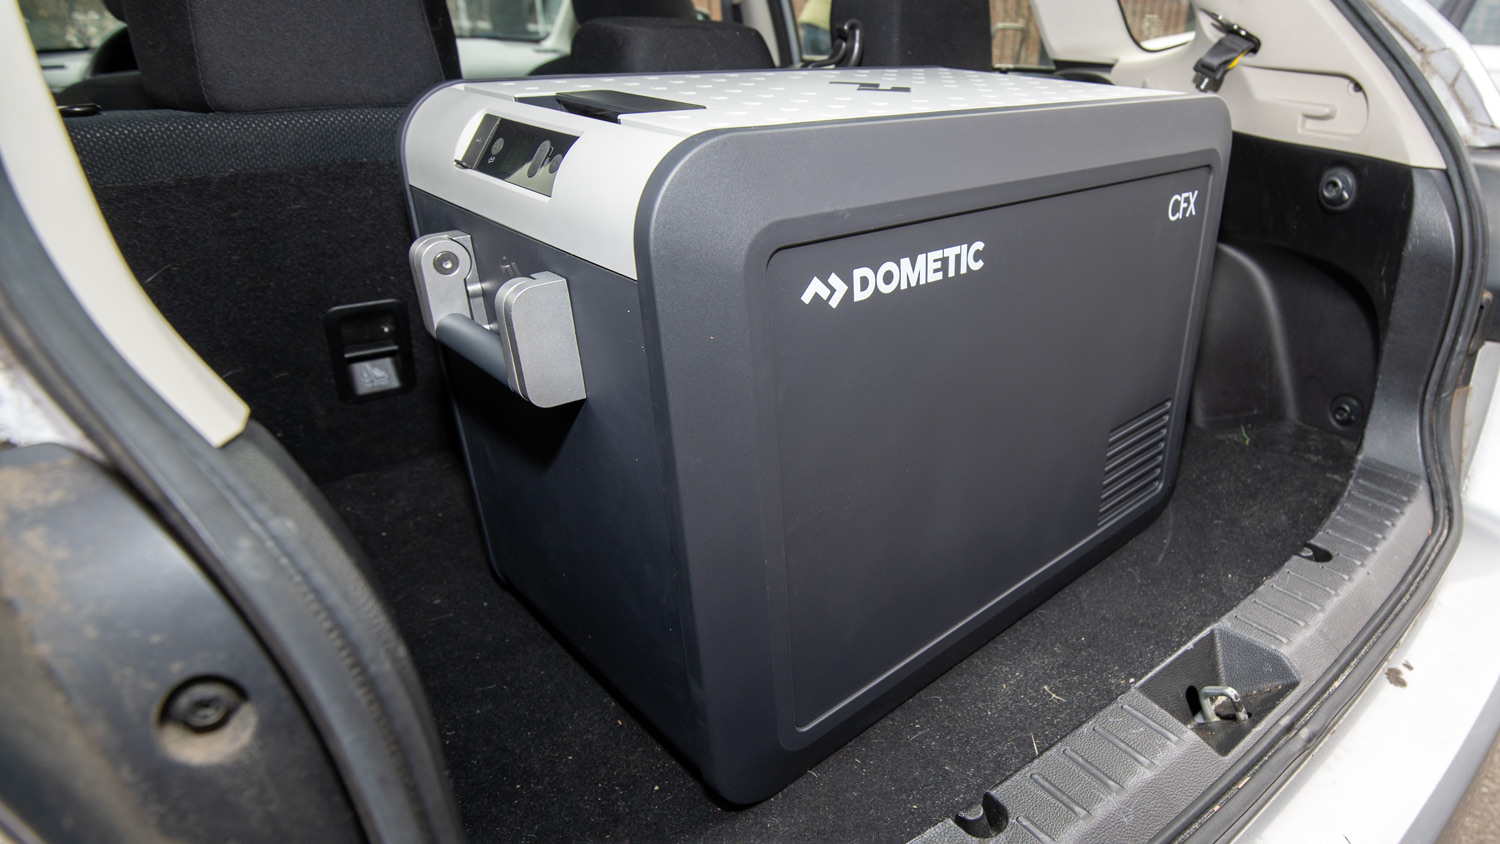 A Dometic CFX3 cooler sits in the open trunk of a car